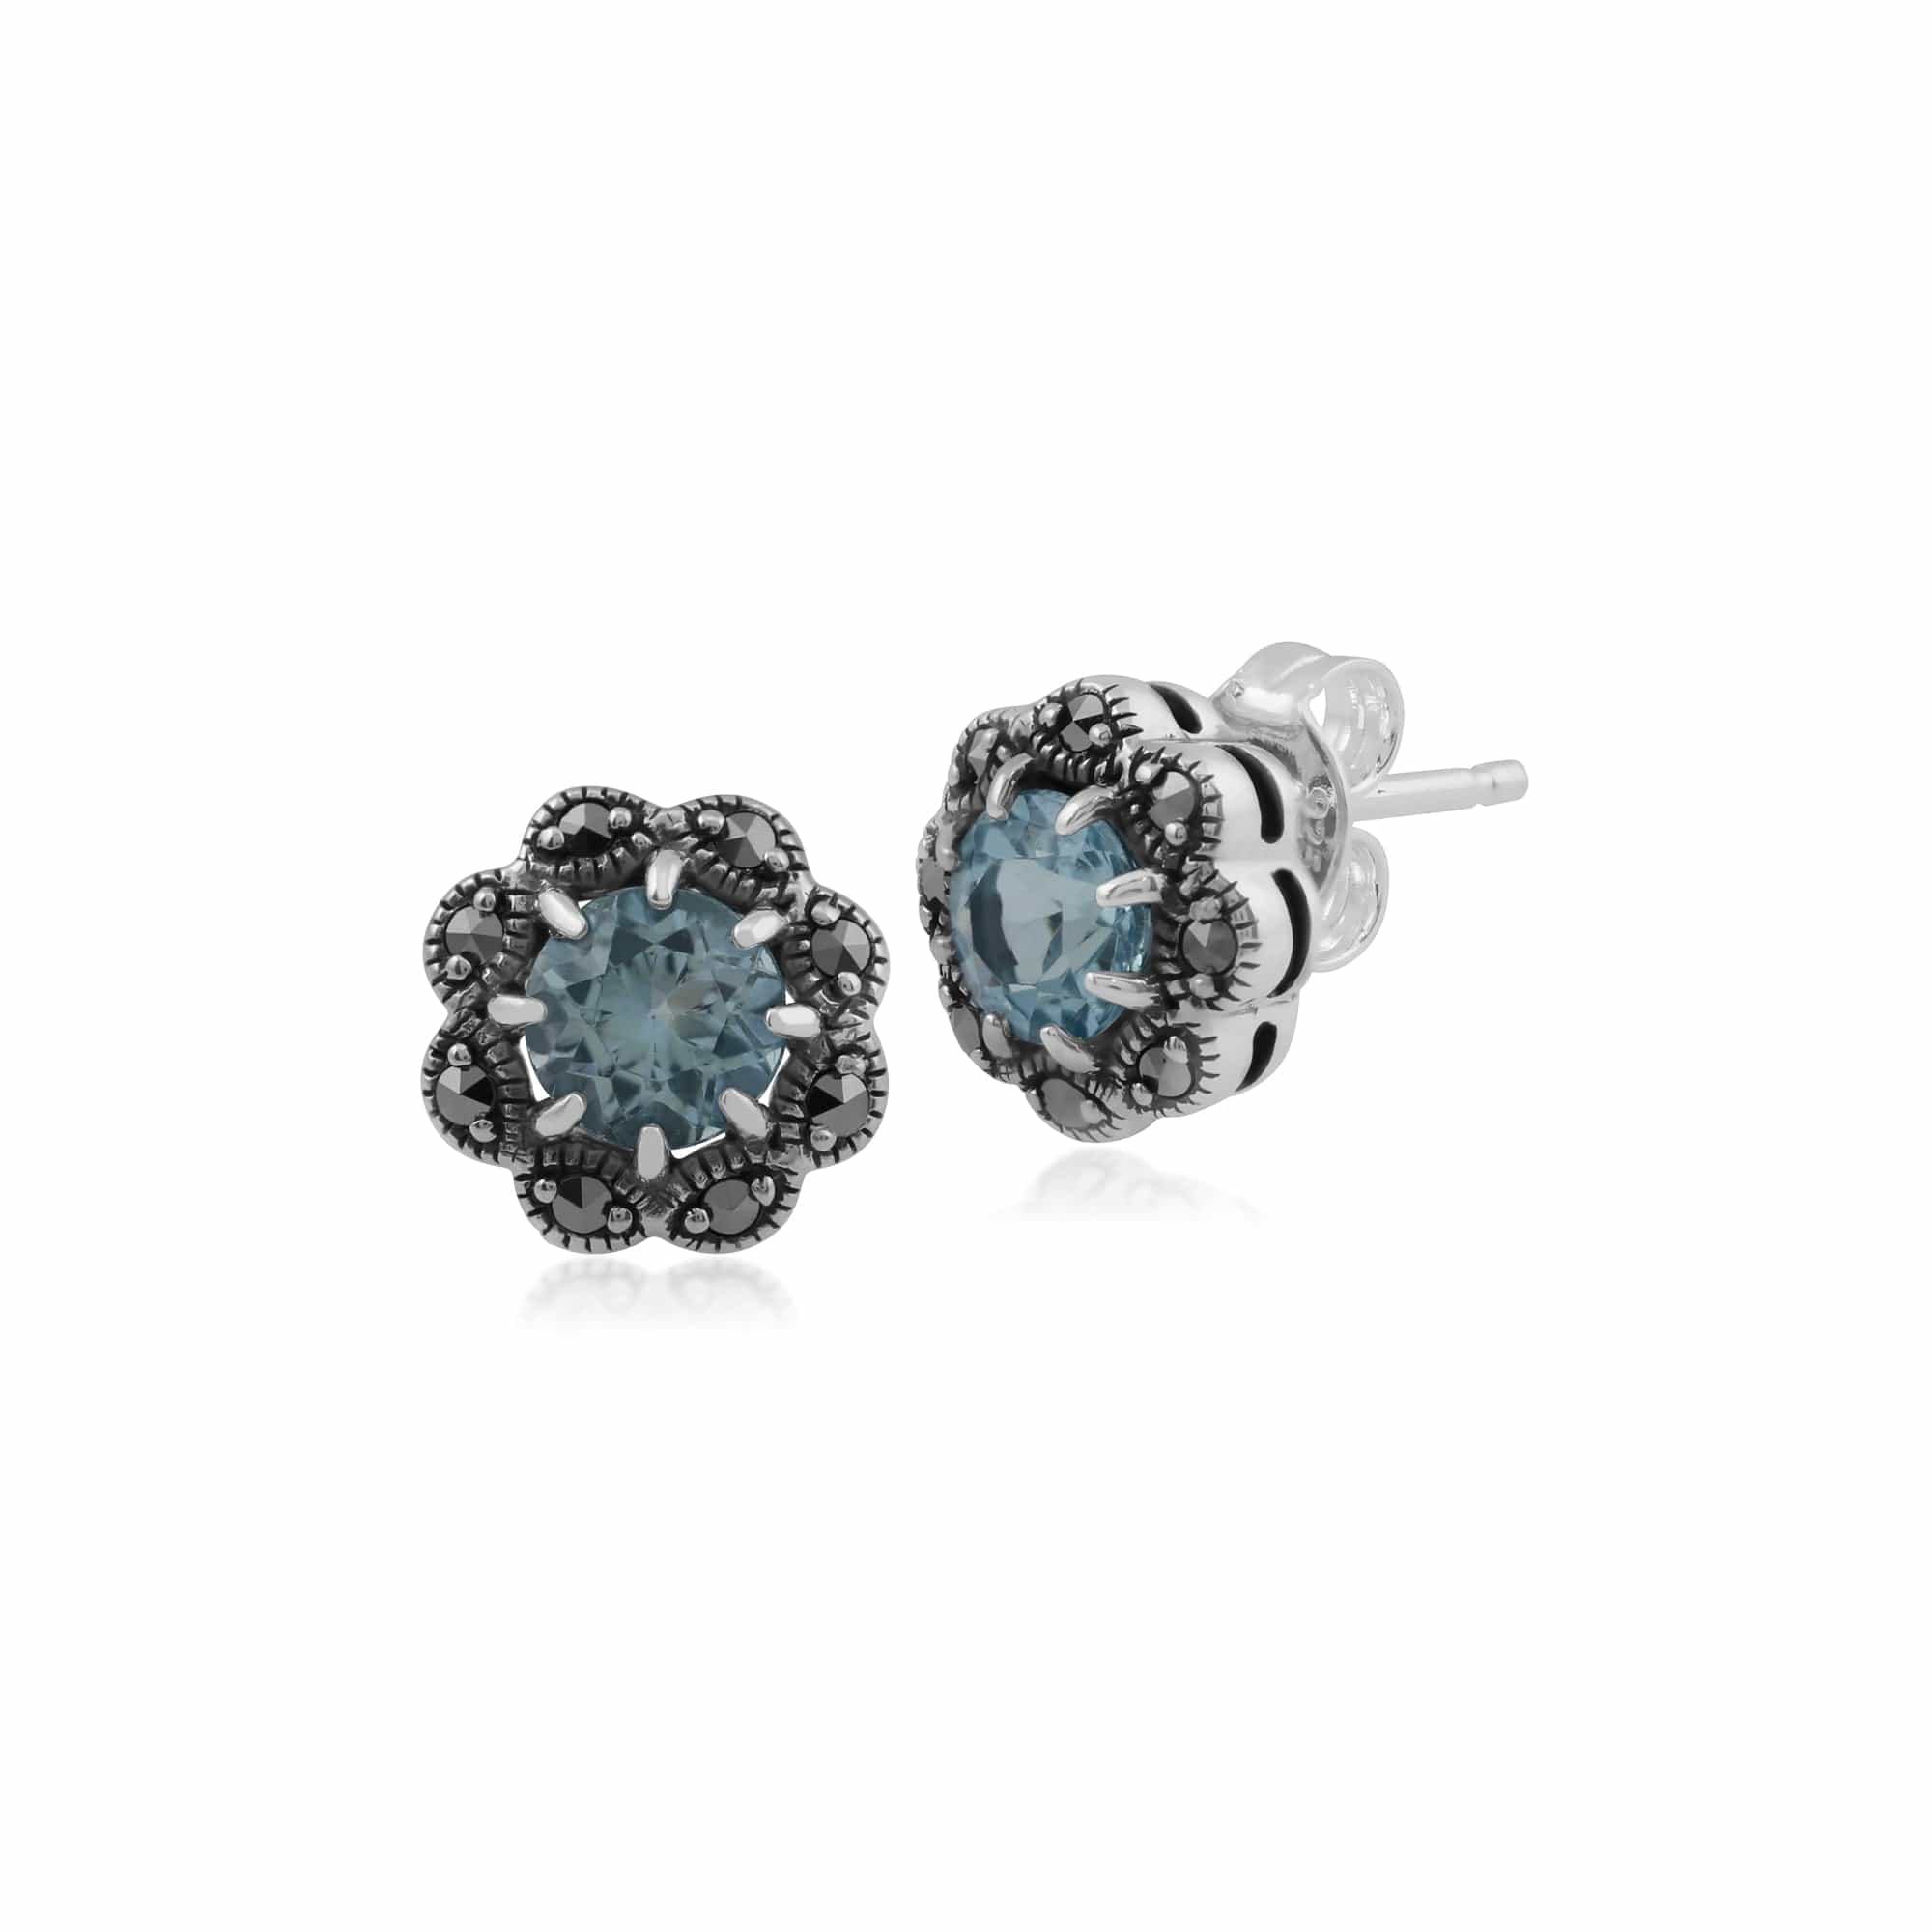 Art Nouveau Style Style Round Blue Topaz & Marcasite Floral Stud Earrings & Ring Set in 925 Sterling Silver - Gemondo